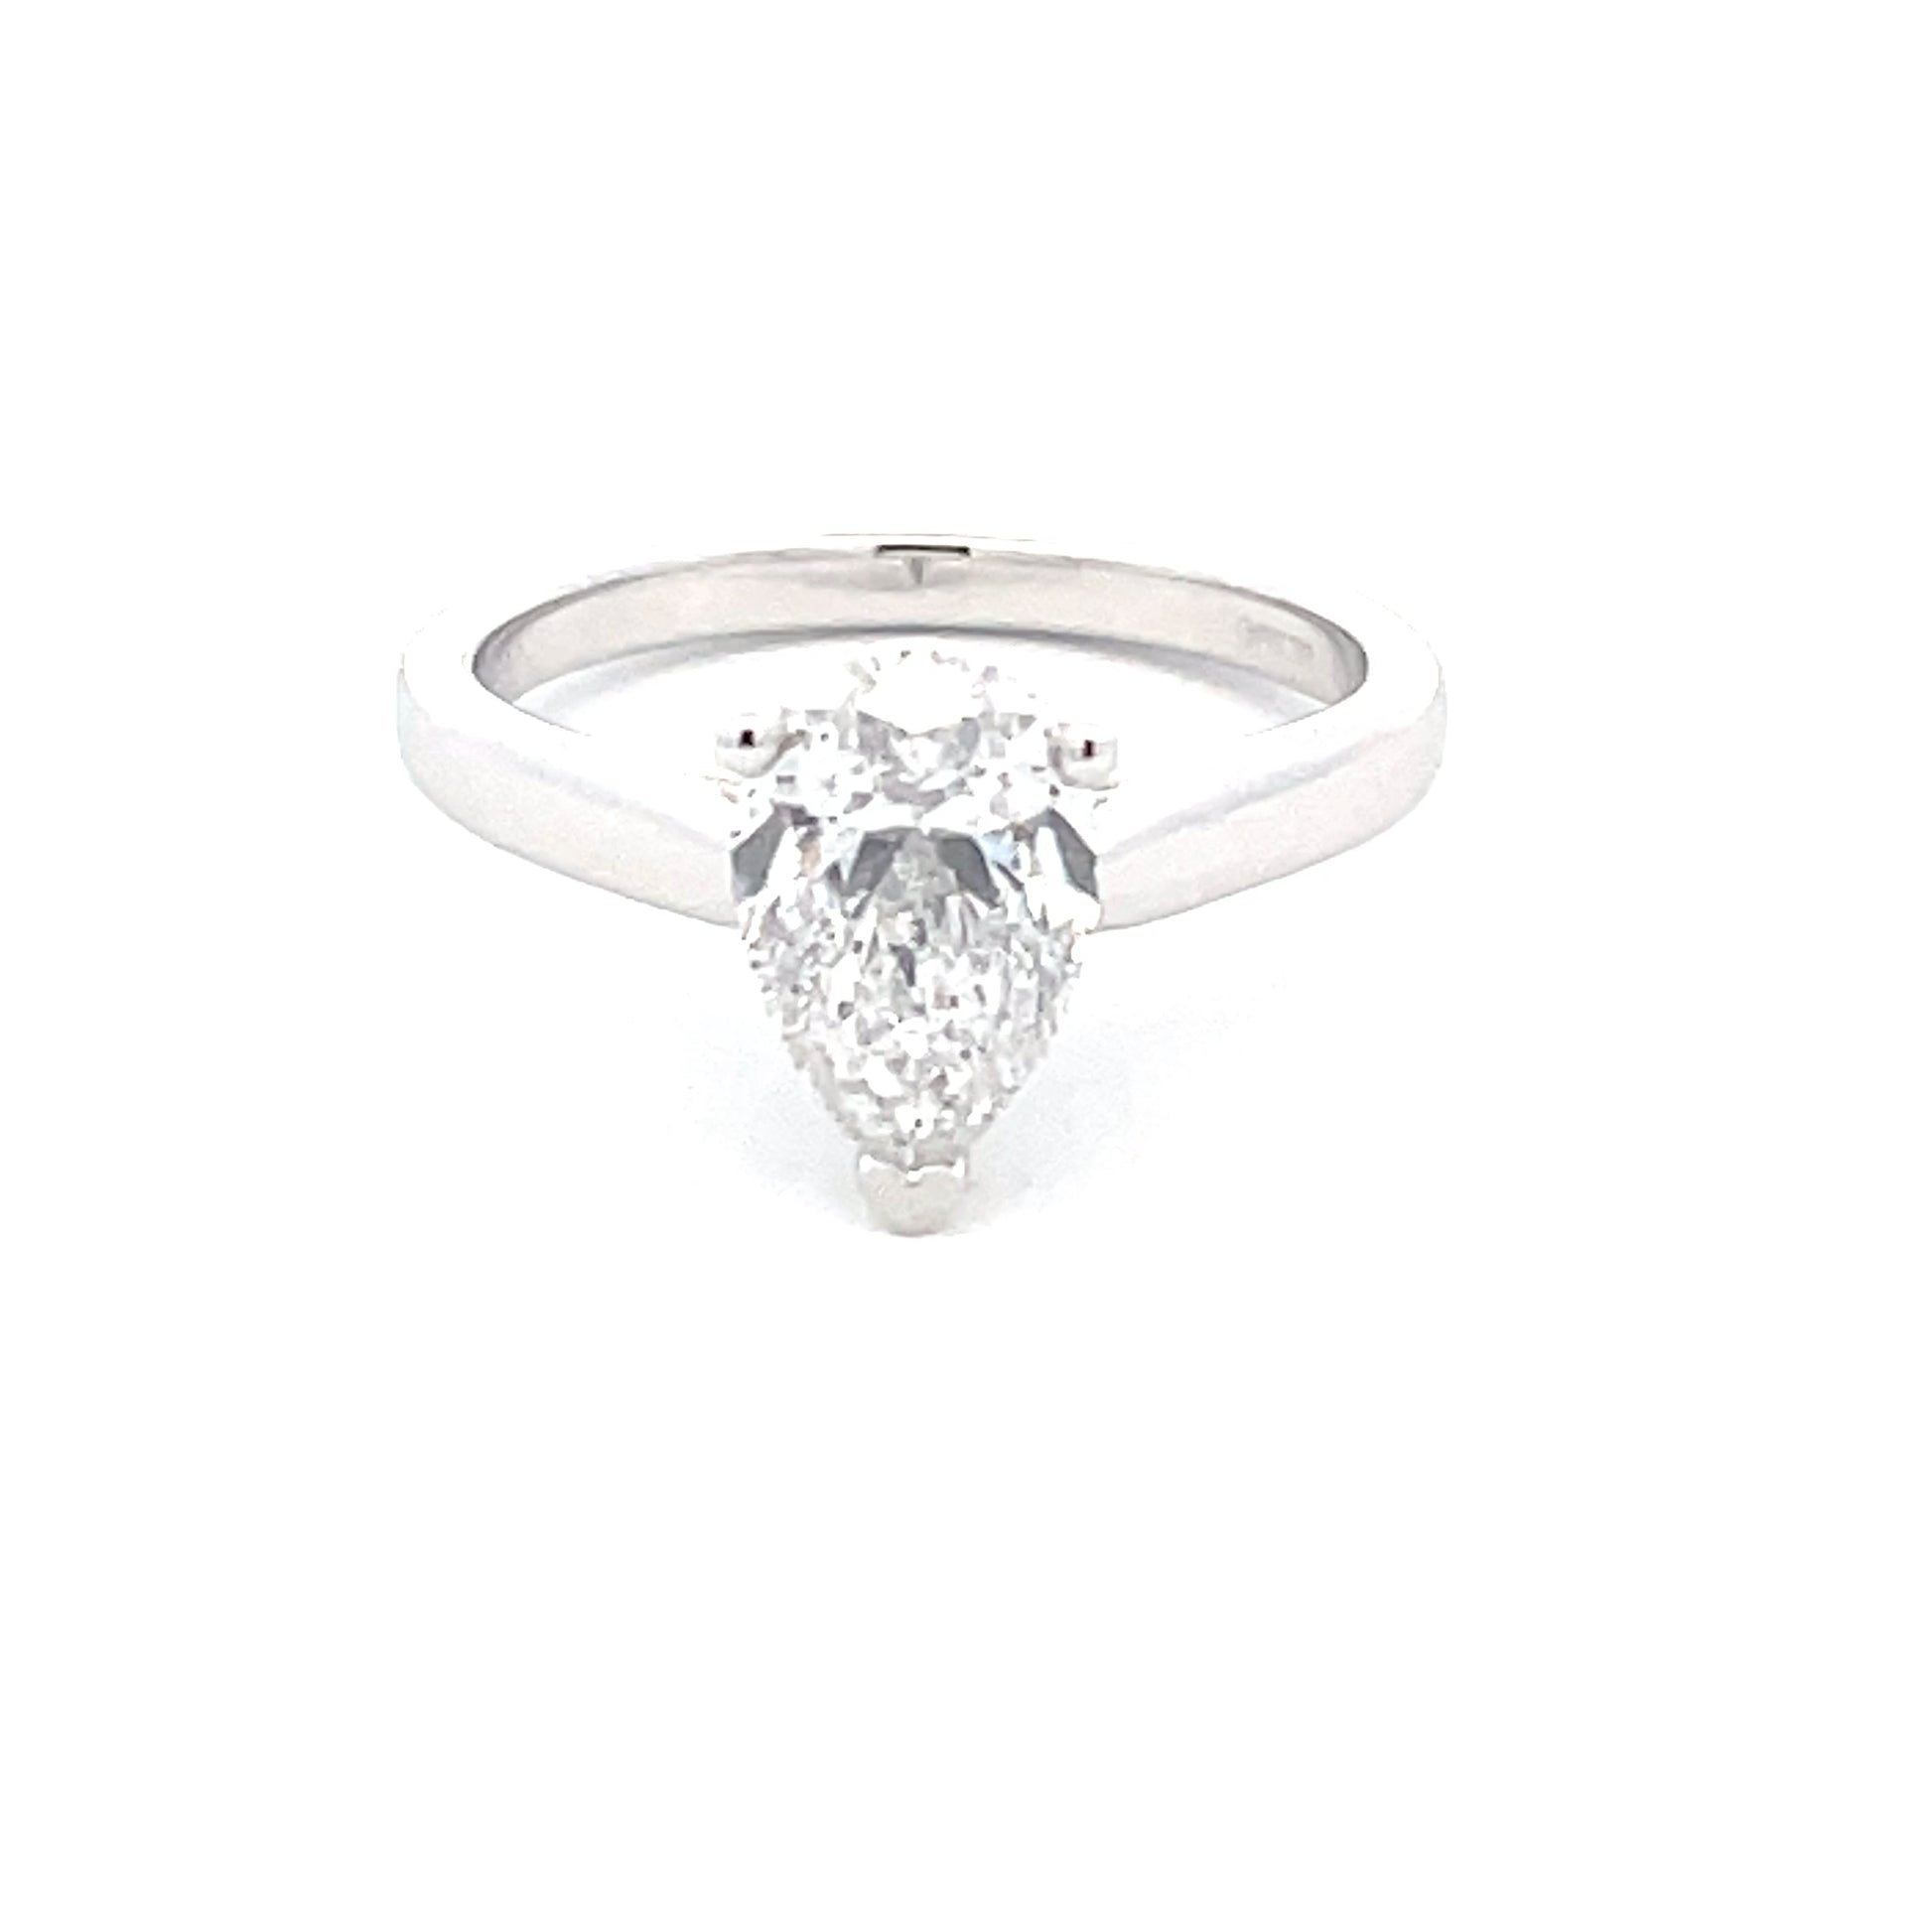 Pear Shaped Diamond Solitaire Ring - 1.51cts  Gardiner Brothers   